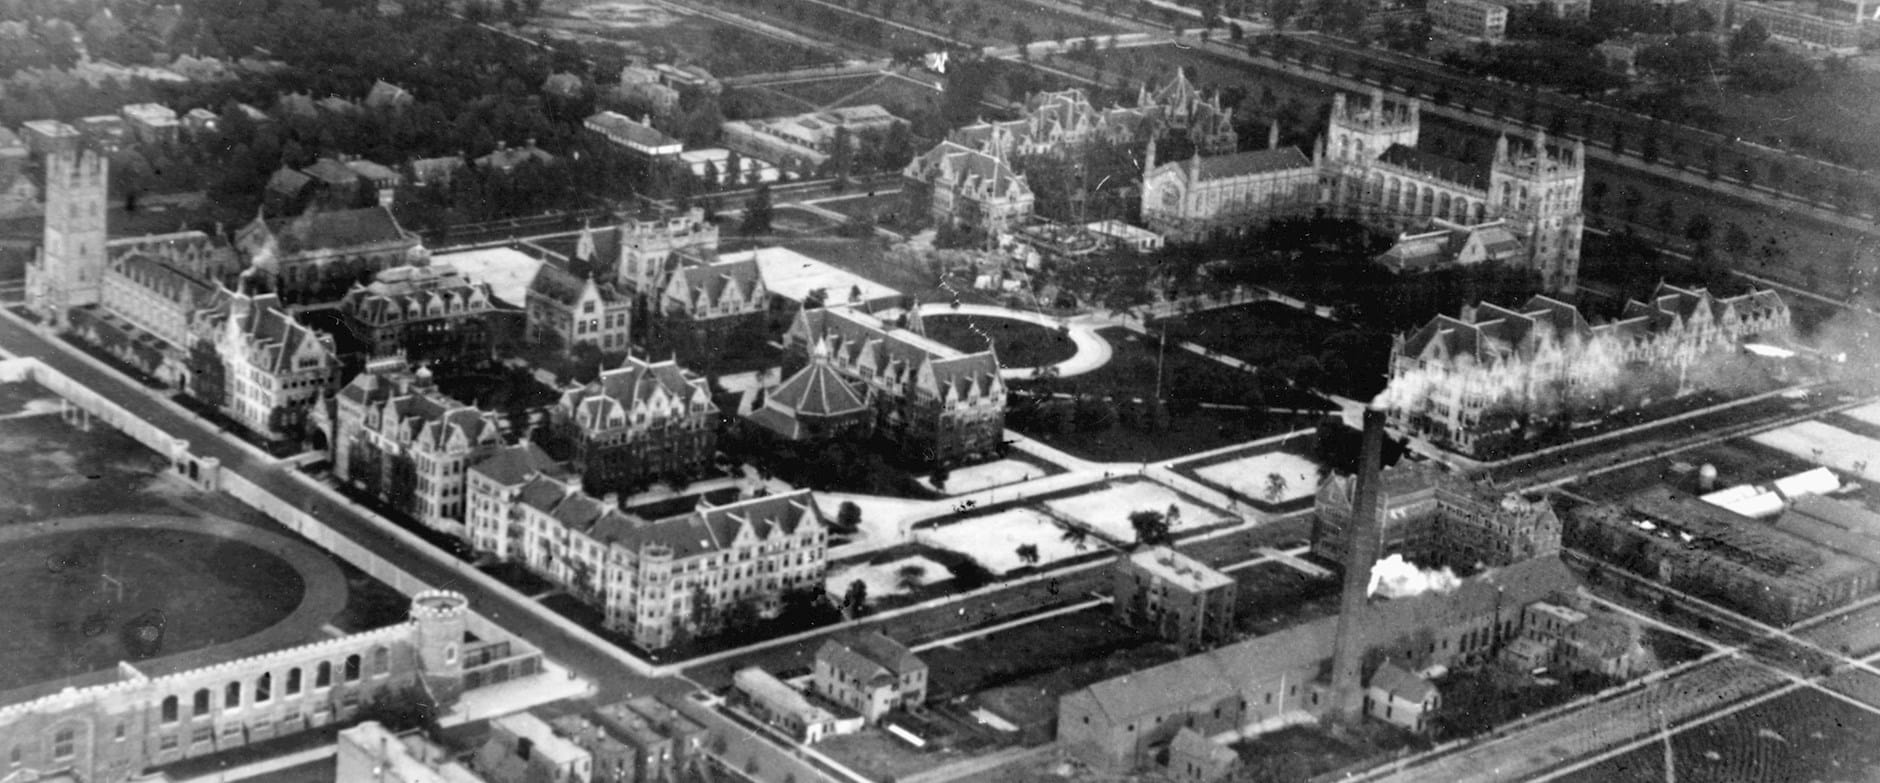 Black and white historic photo of campus from above